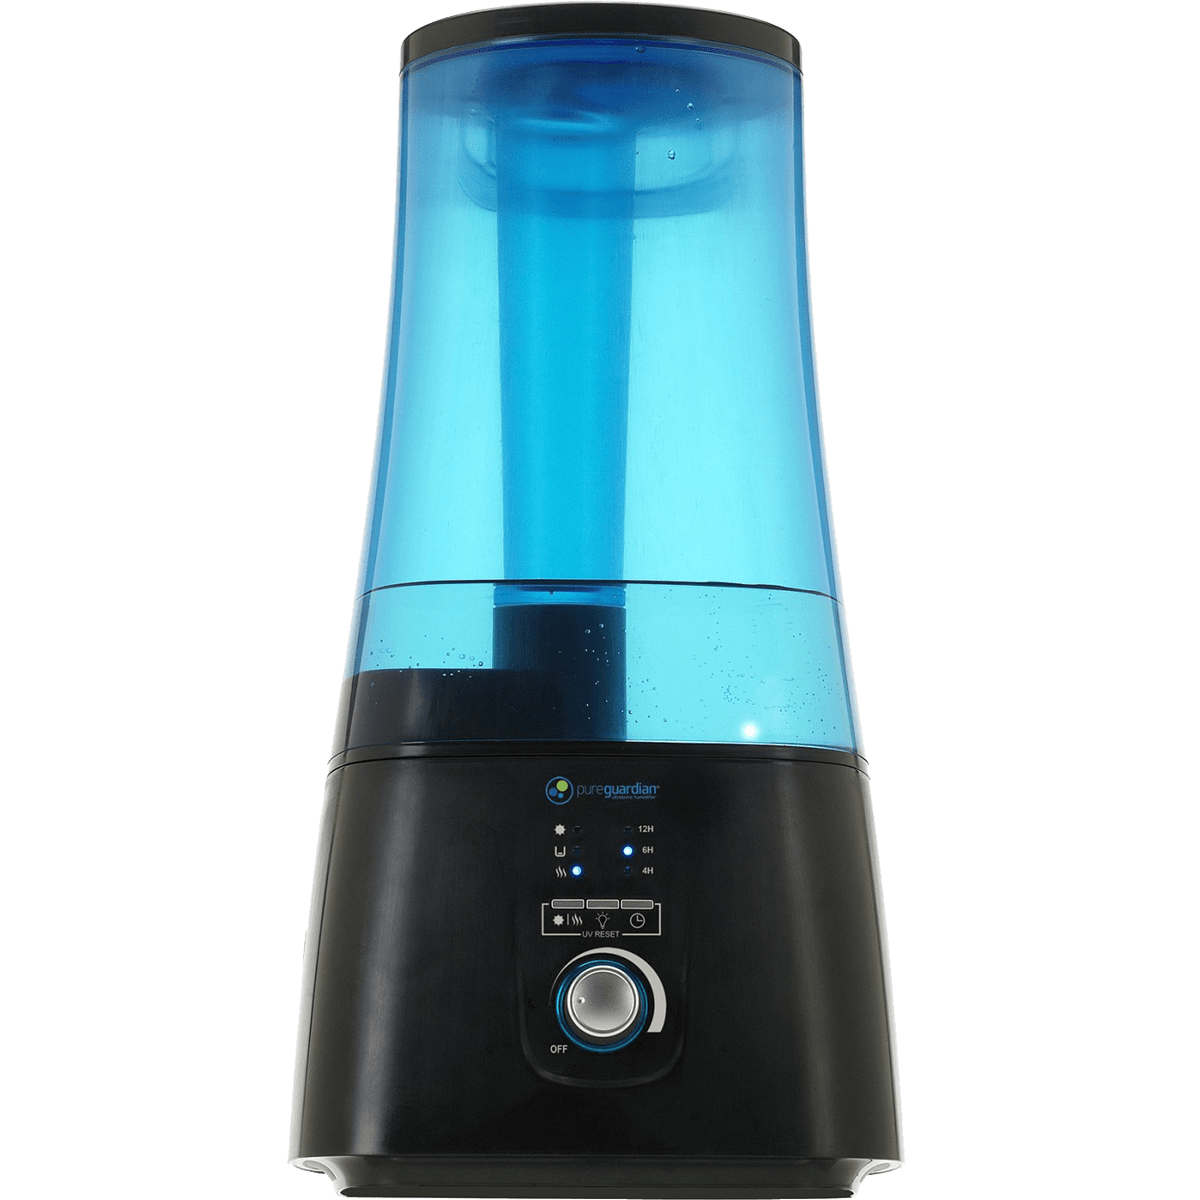 cleanest cool mist humidifier